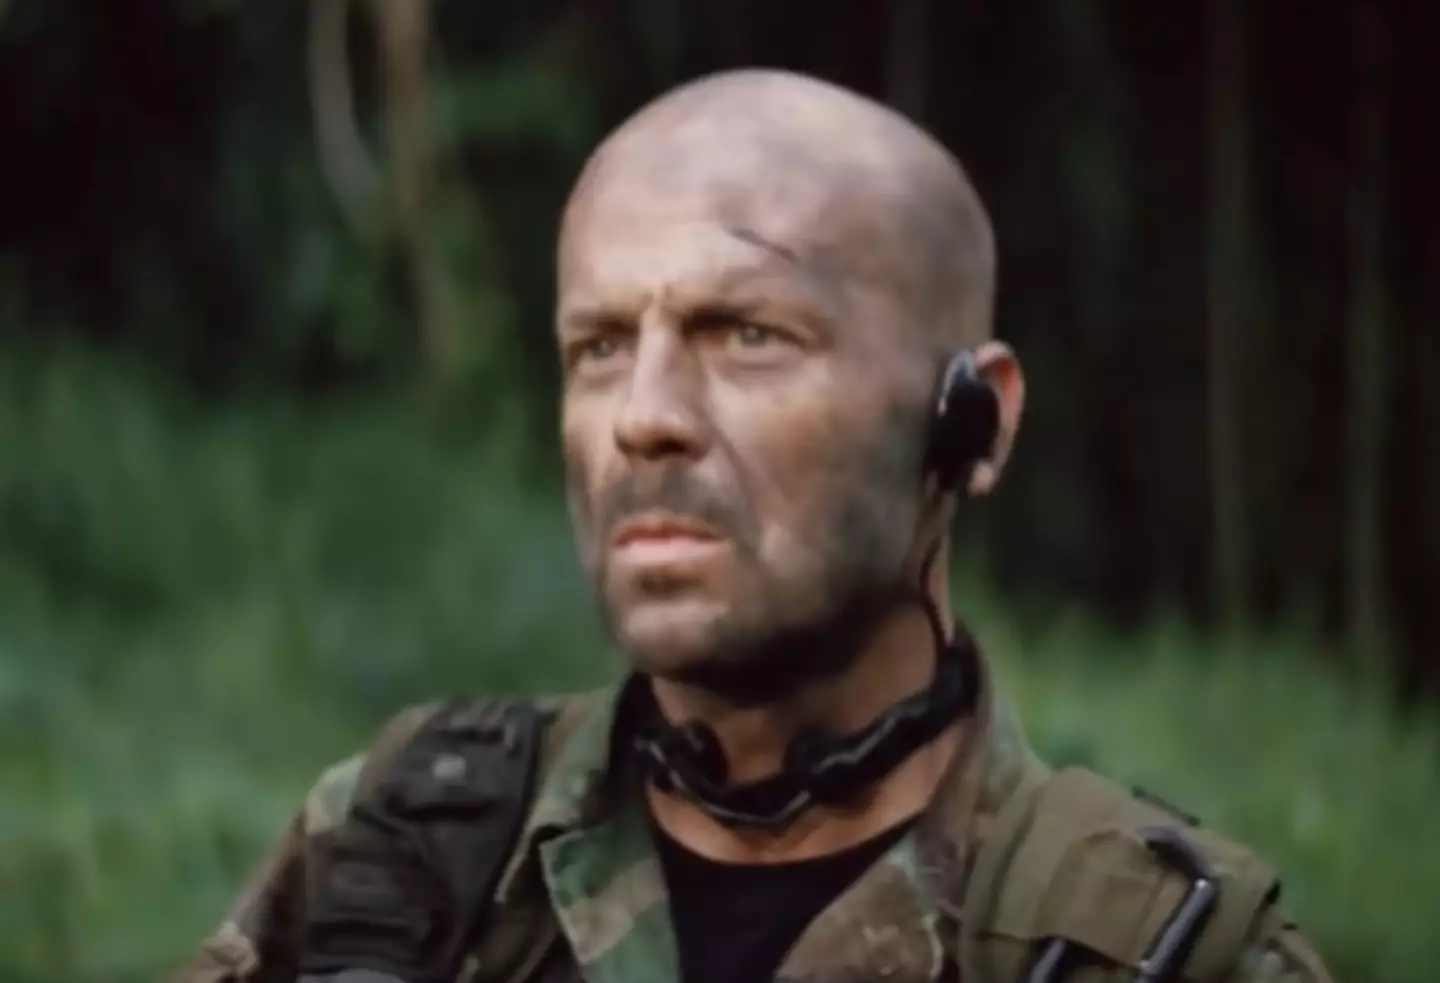 Bruce Willis appeared in the 2003 movie, which has found new audiences via streaming.